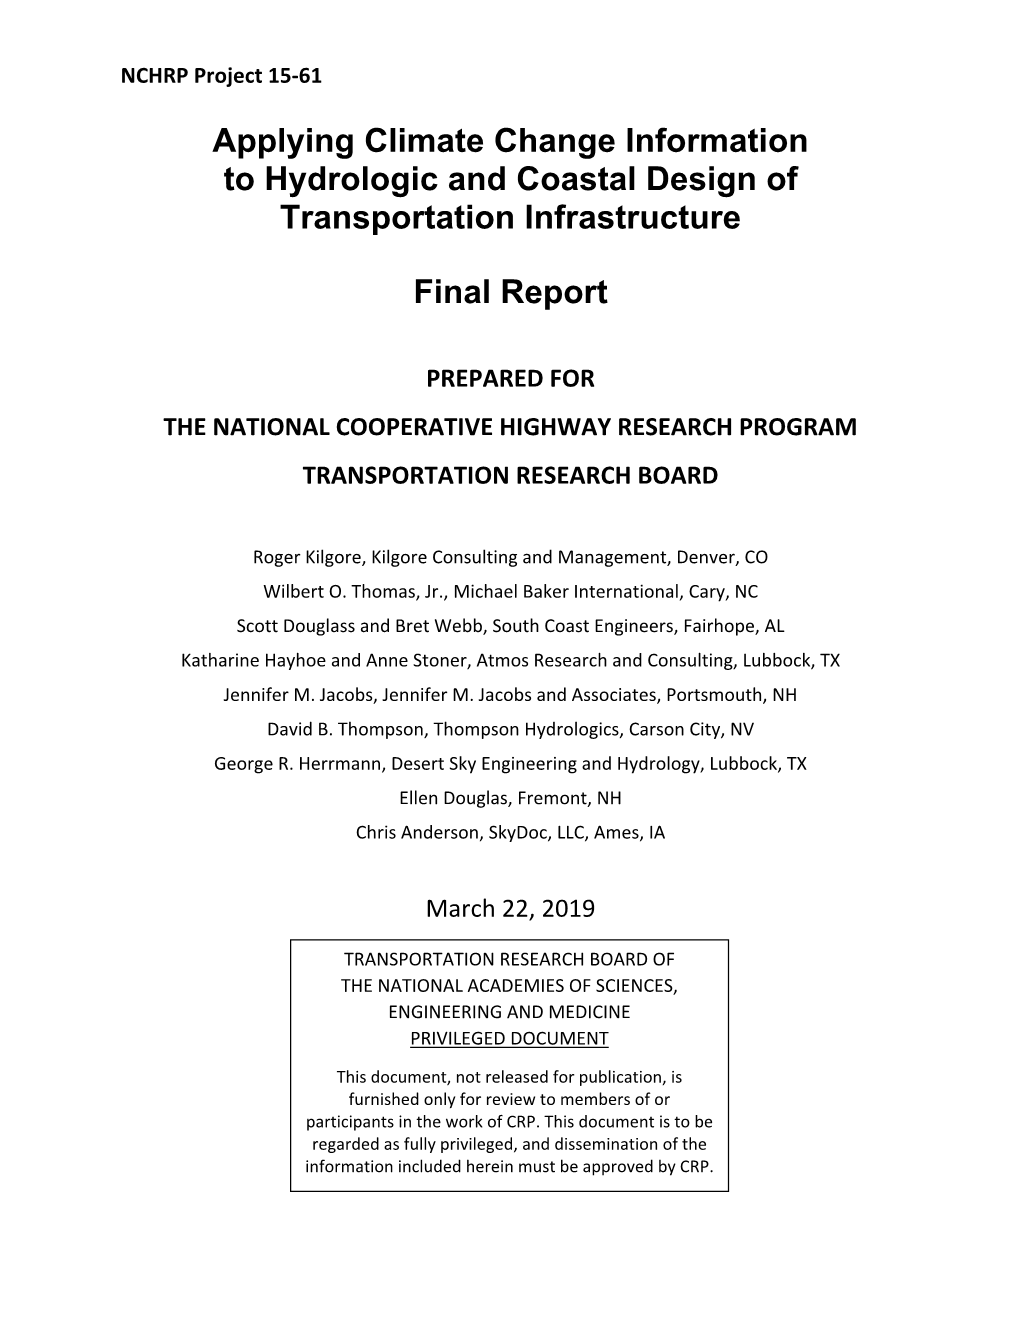 Applying Climate Change Information to Hydrologic and Coastal Design of Transportation Infrastructure